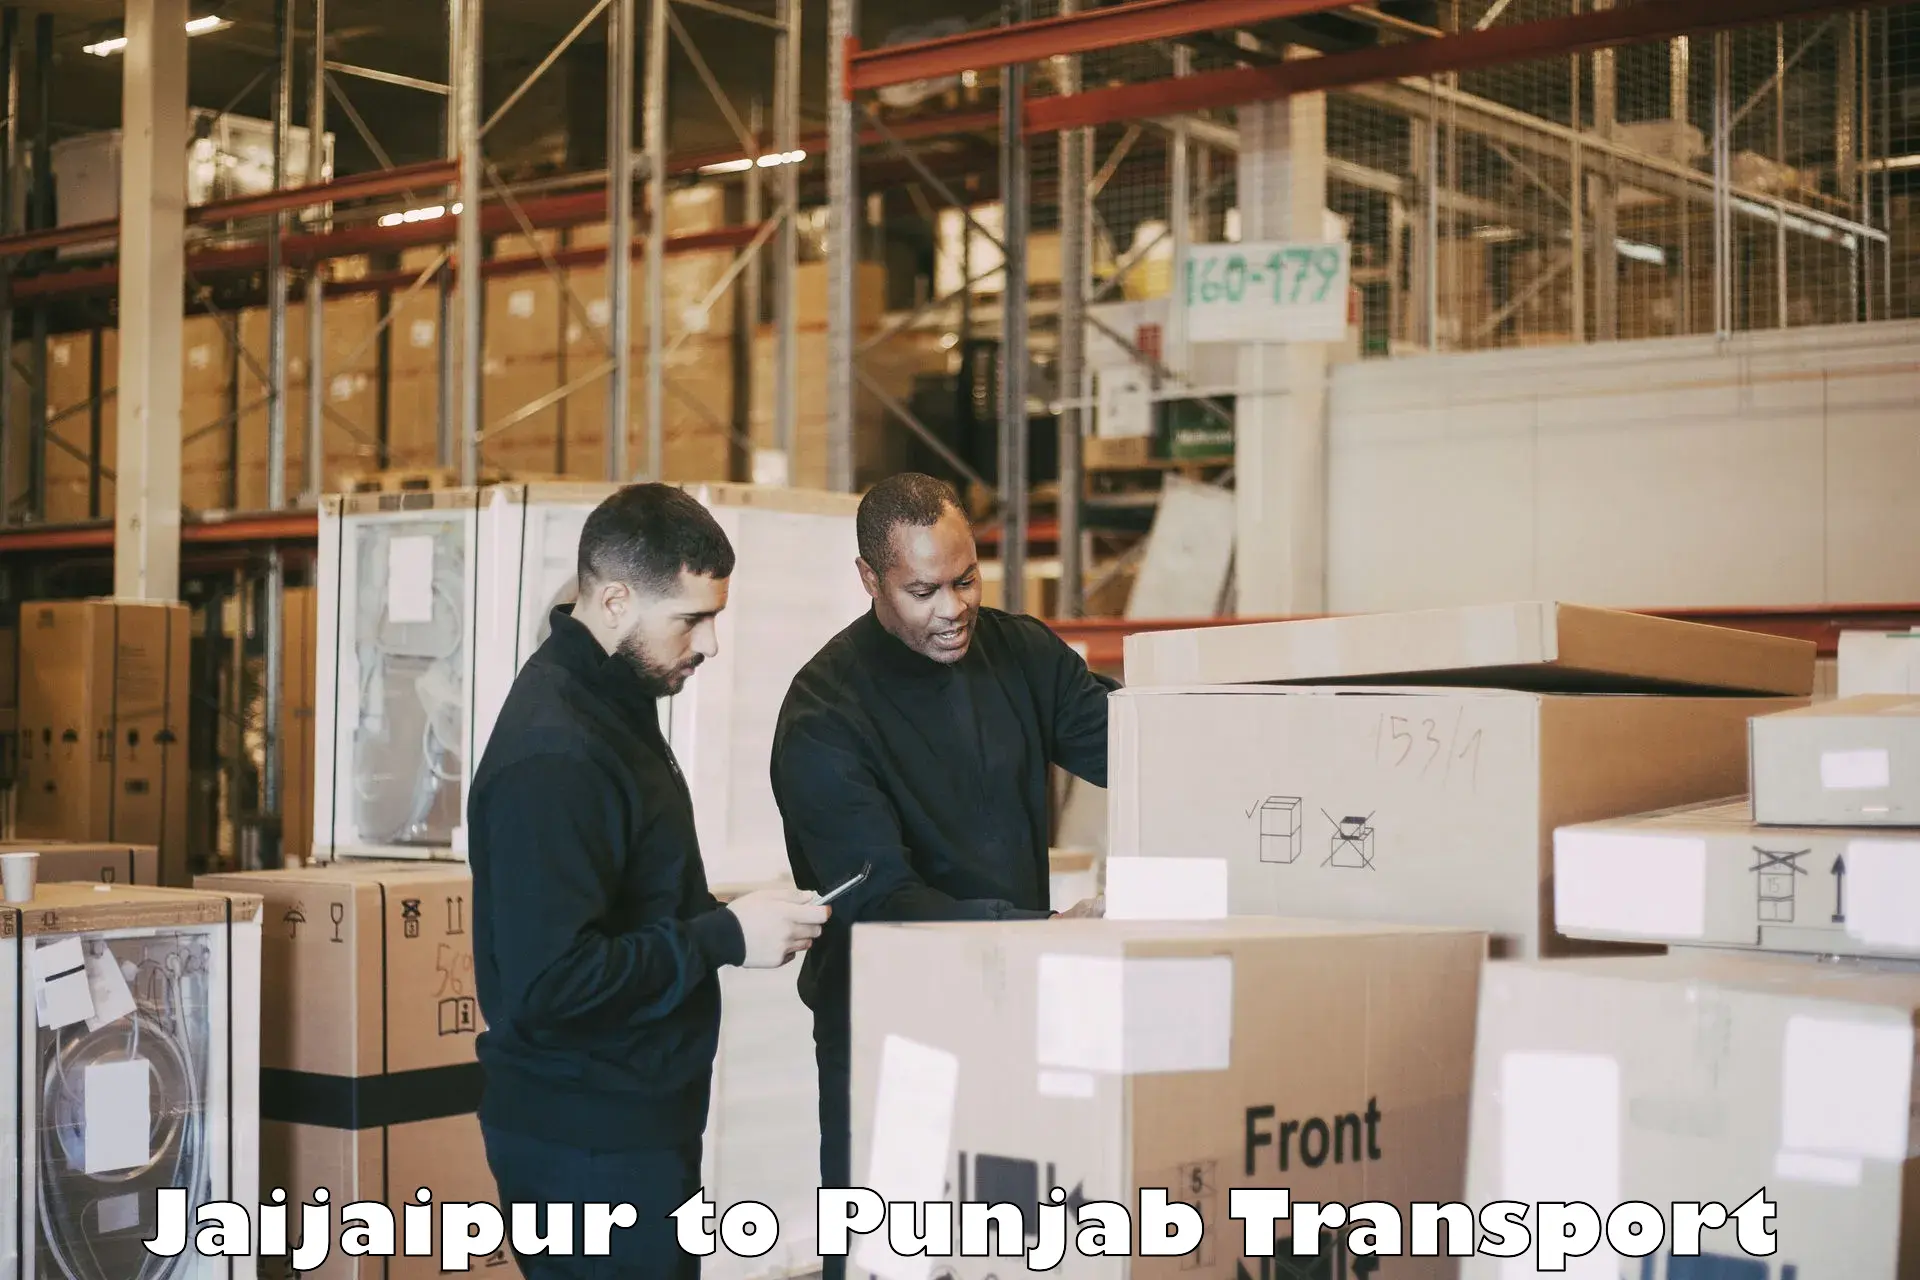 Daily parcel service transport in Jaijaipur to Firozpur